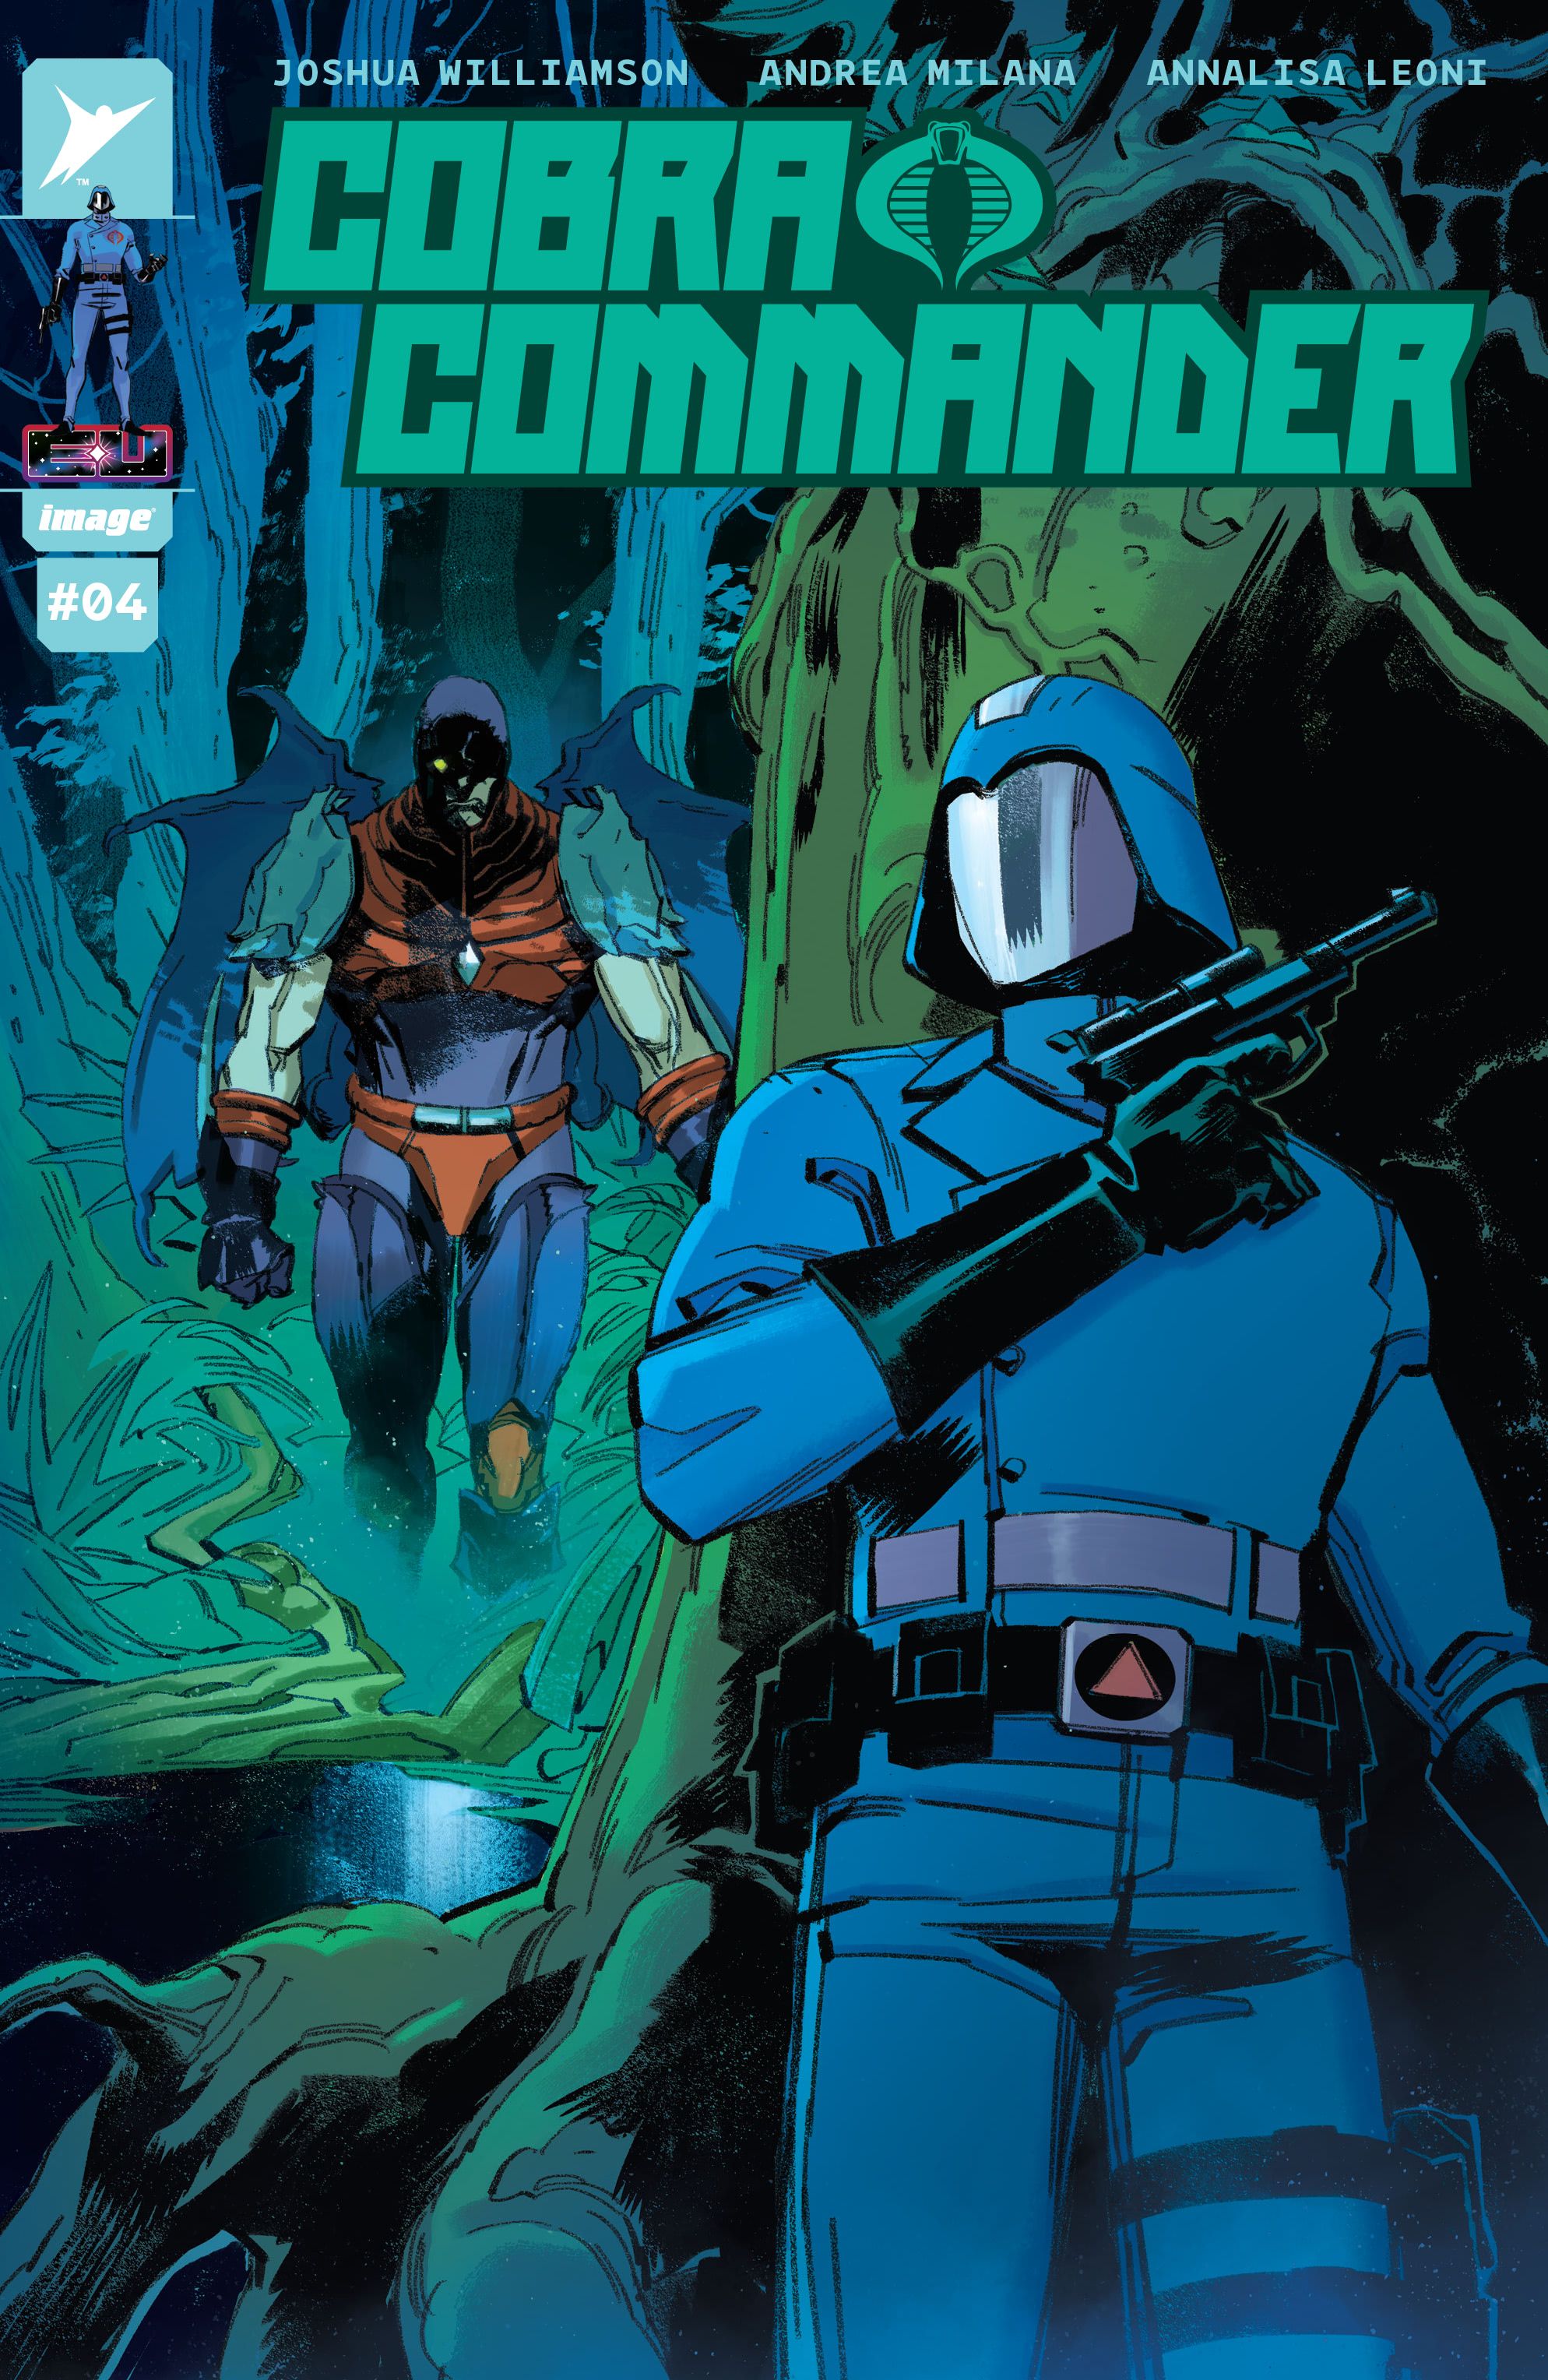 Cobra Commander #4 Cover by Andrea Milana, the Commander hiding behind a tree as the Nemesis Enforcer stalks toward him